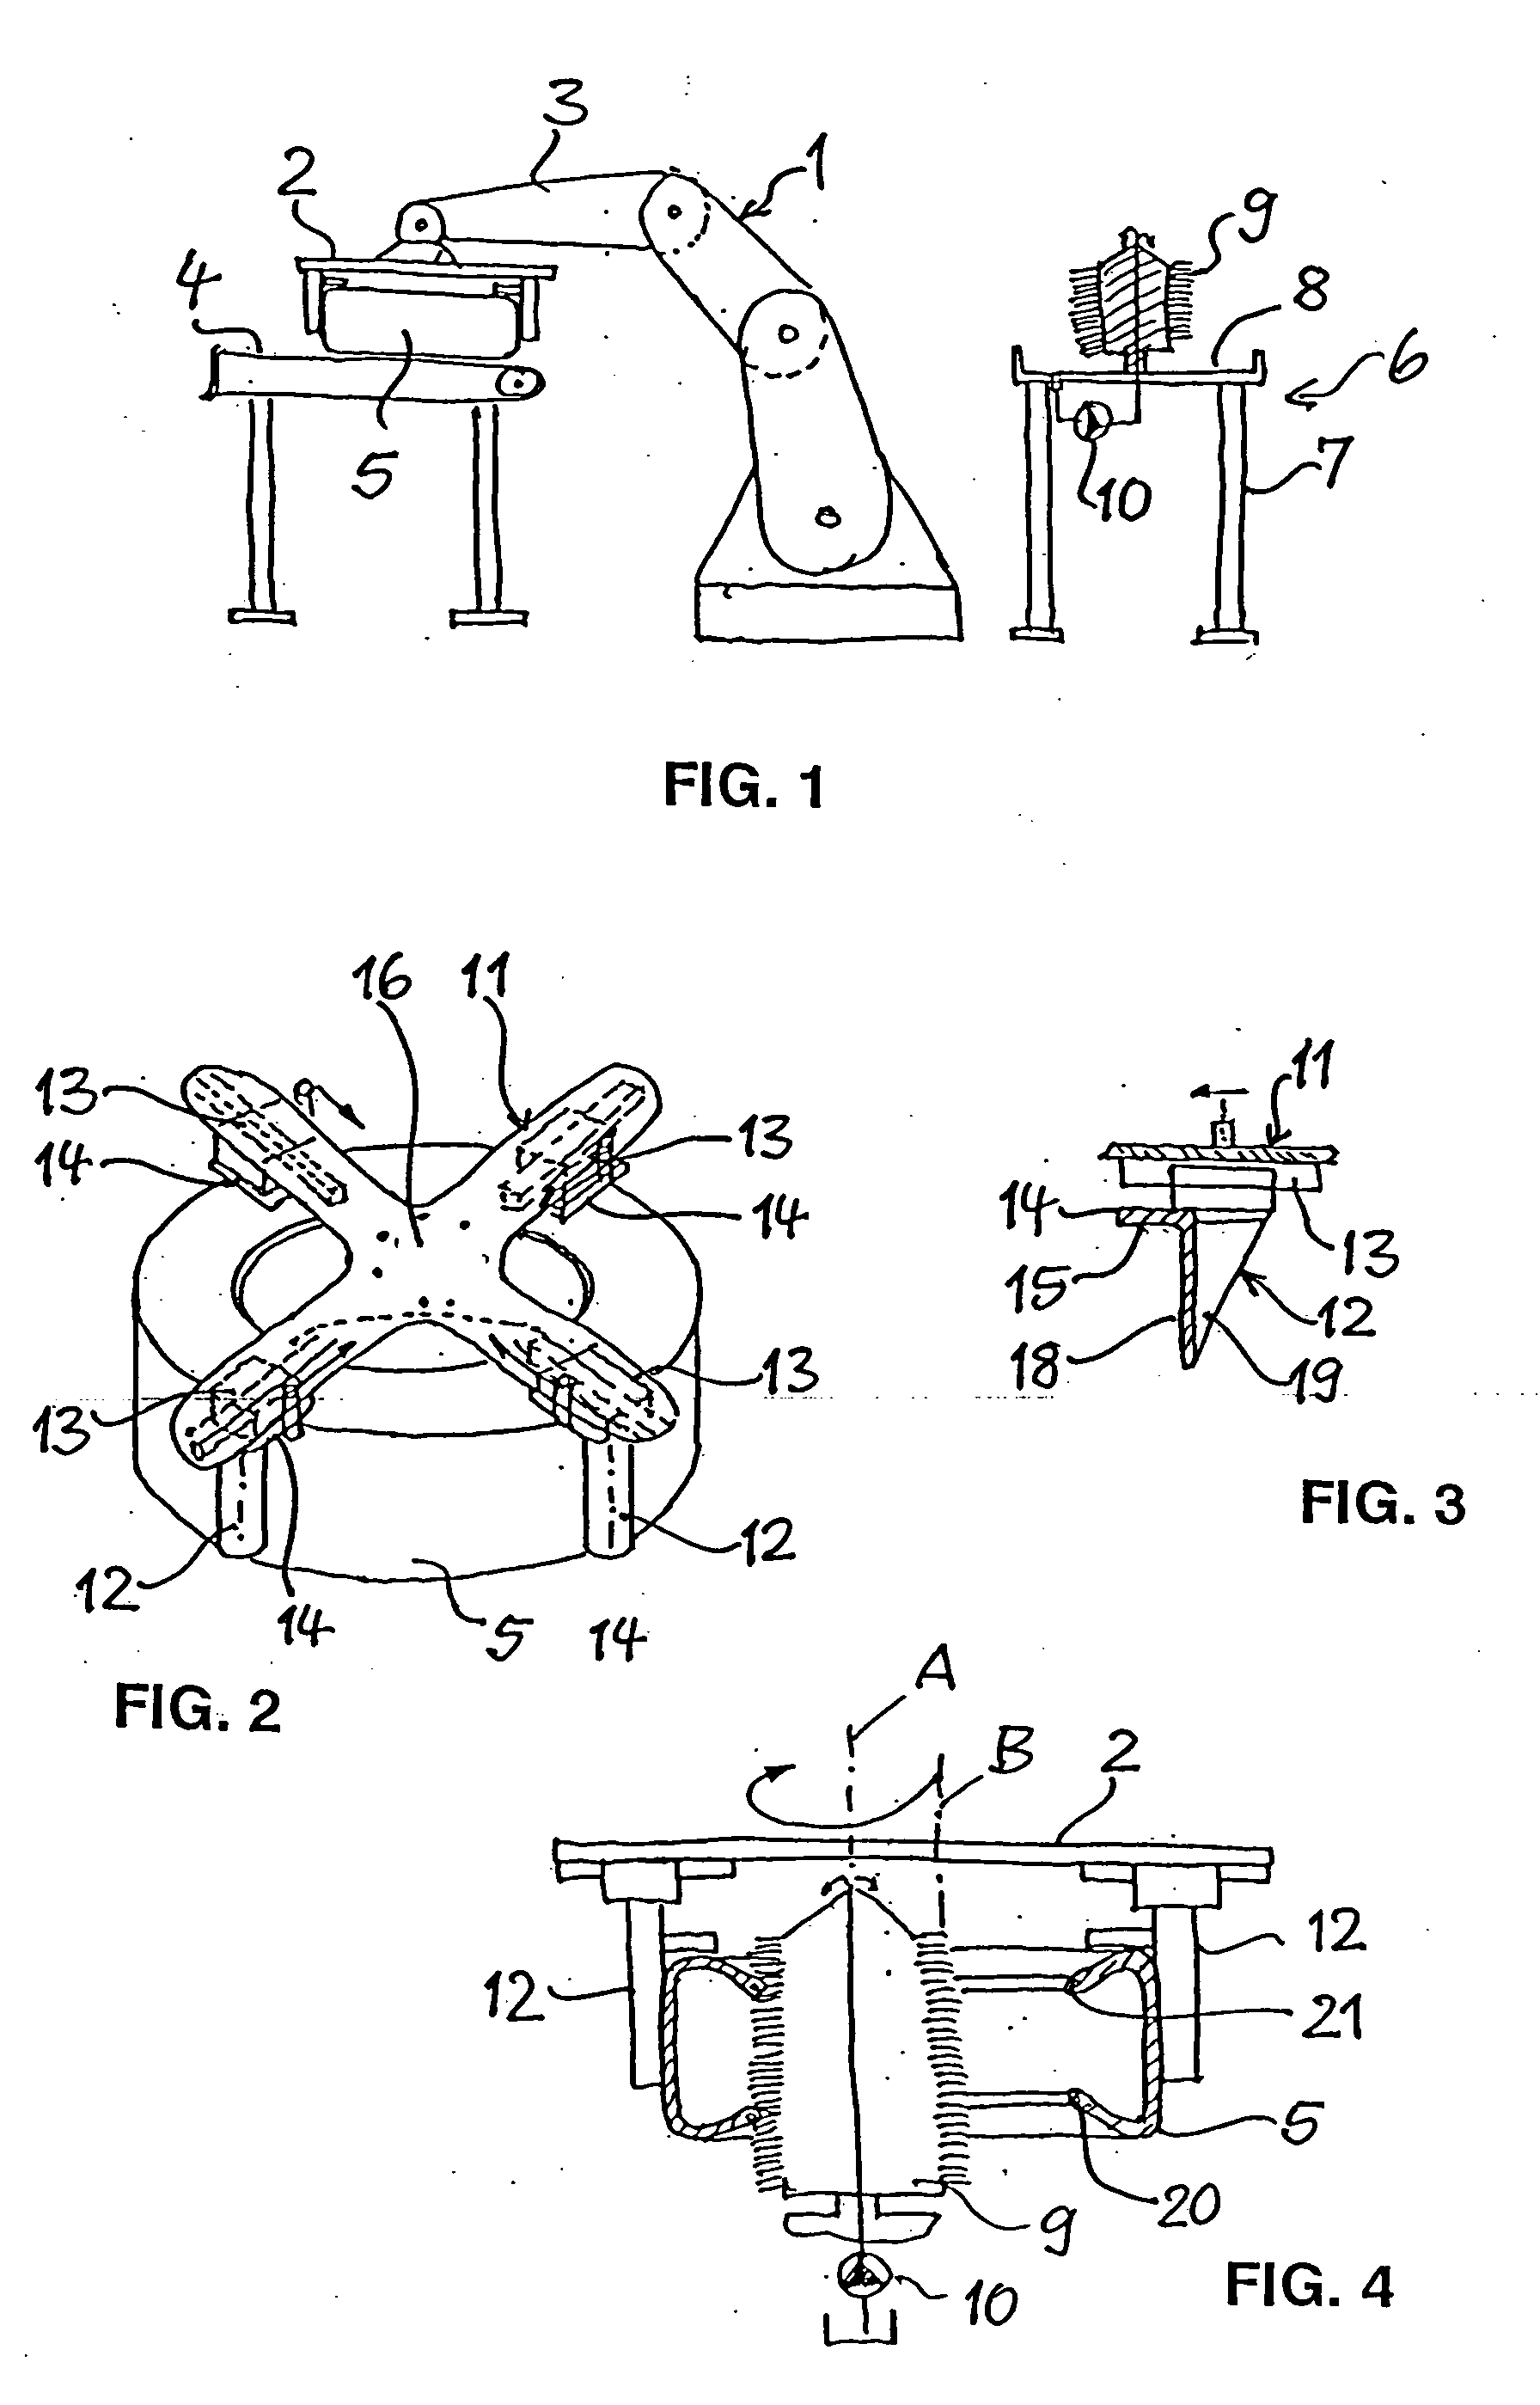 Method and apparatus for mounting a pneumatic tire